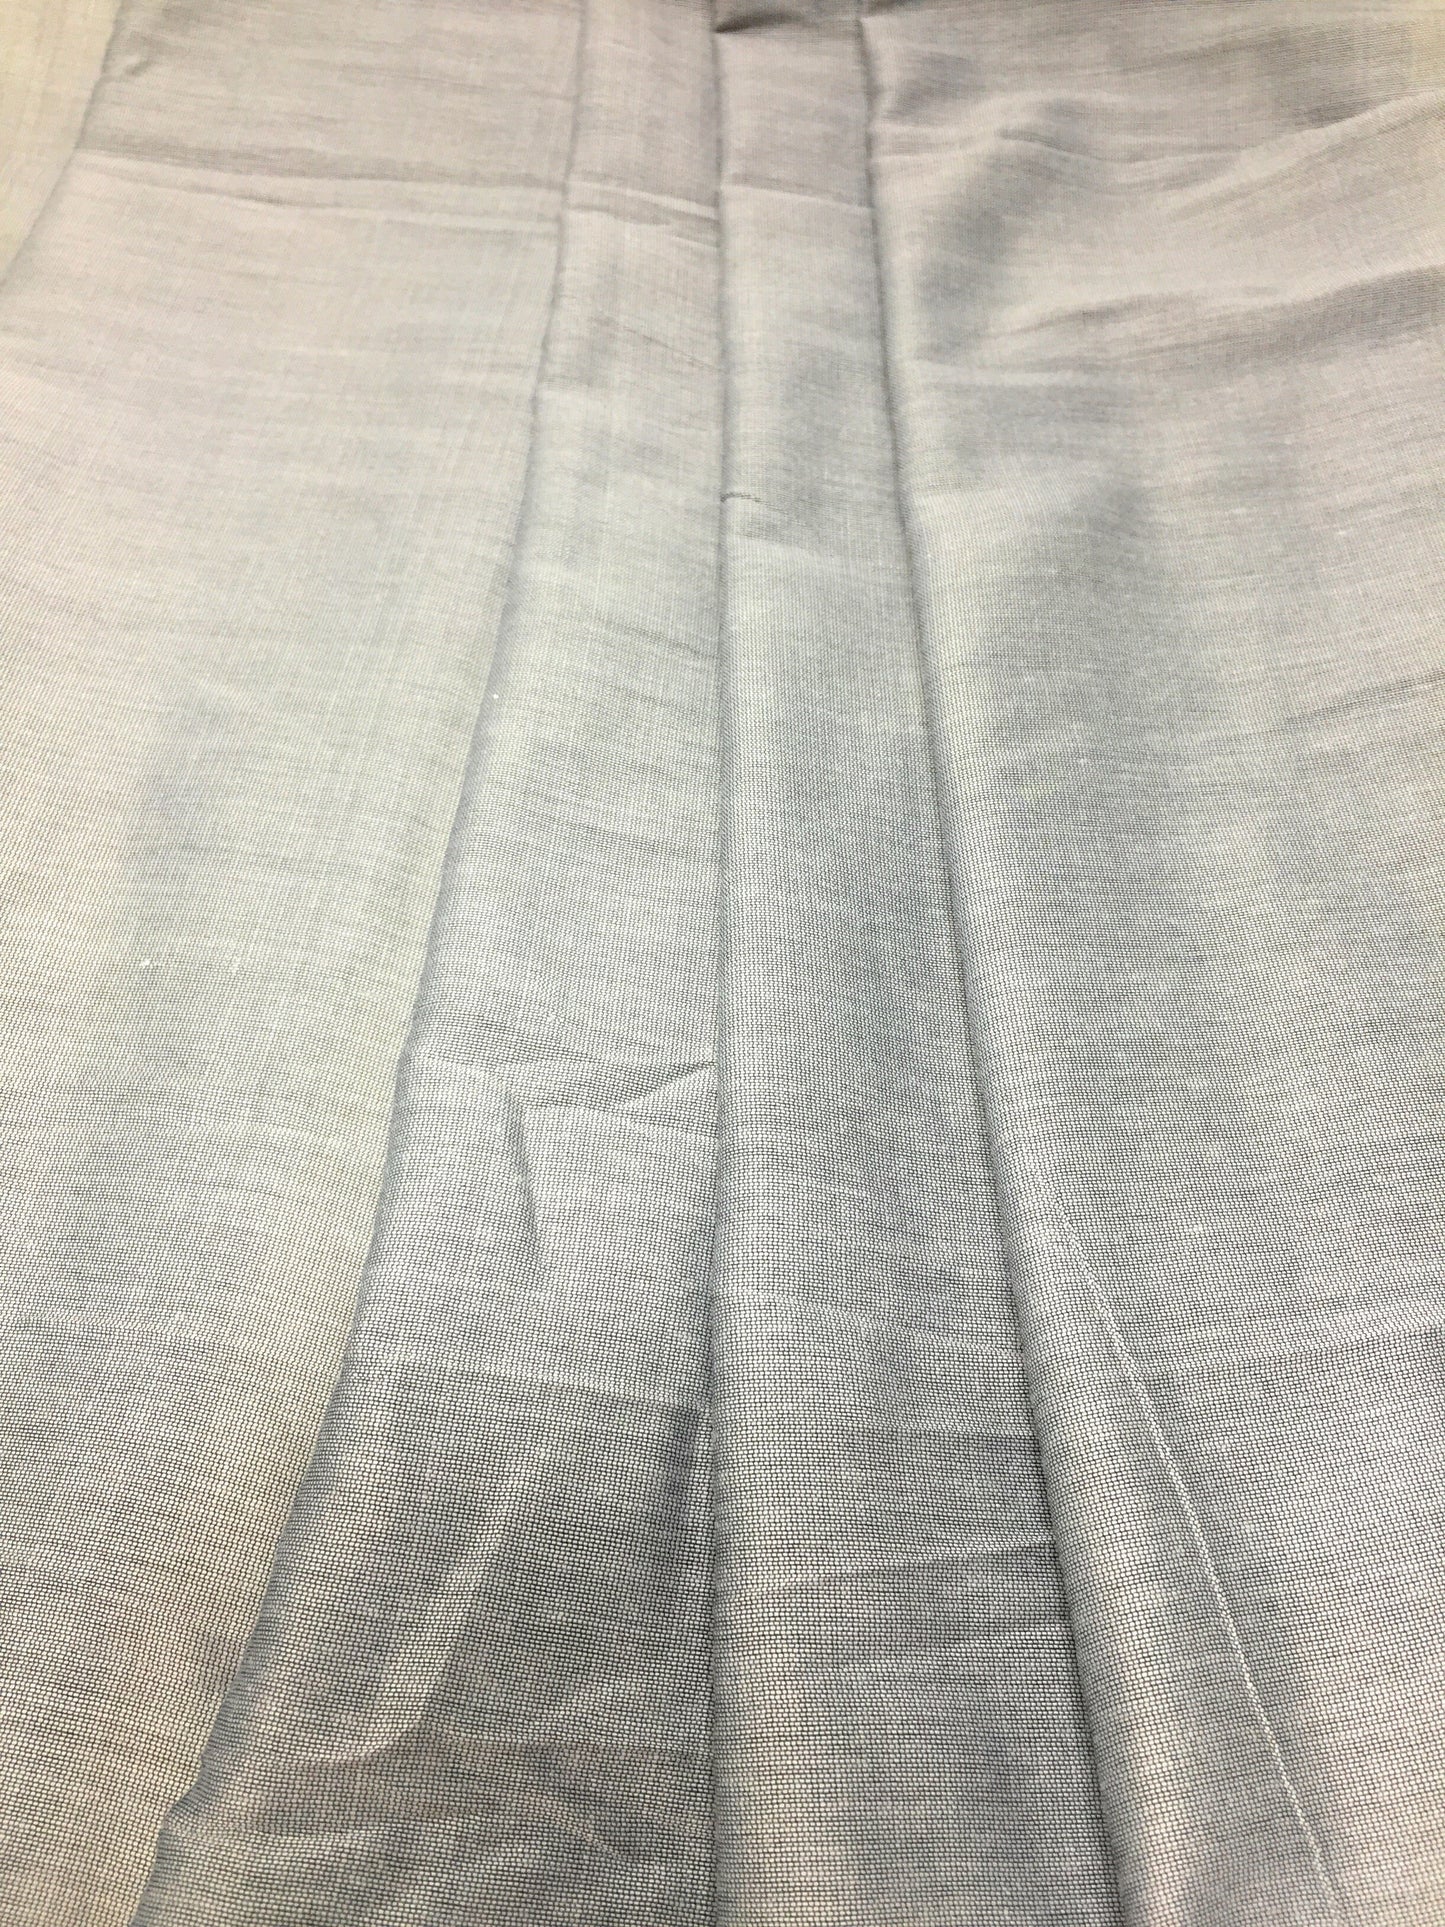 Cotton Silk Grey Solids  Fabric Material - By the yard